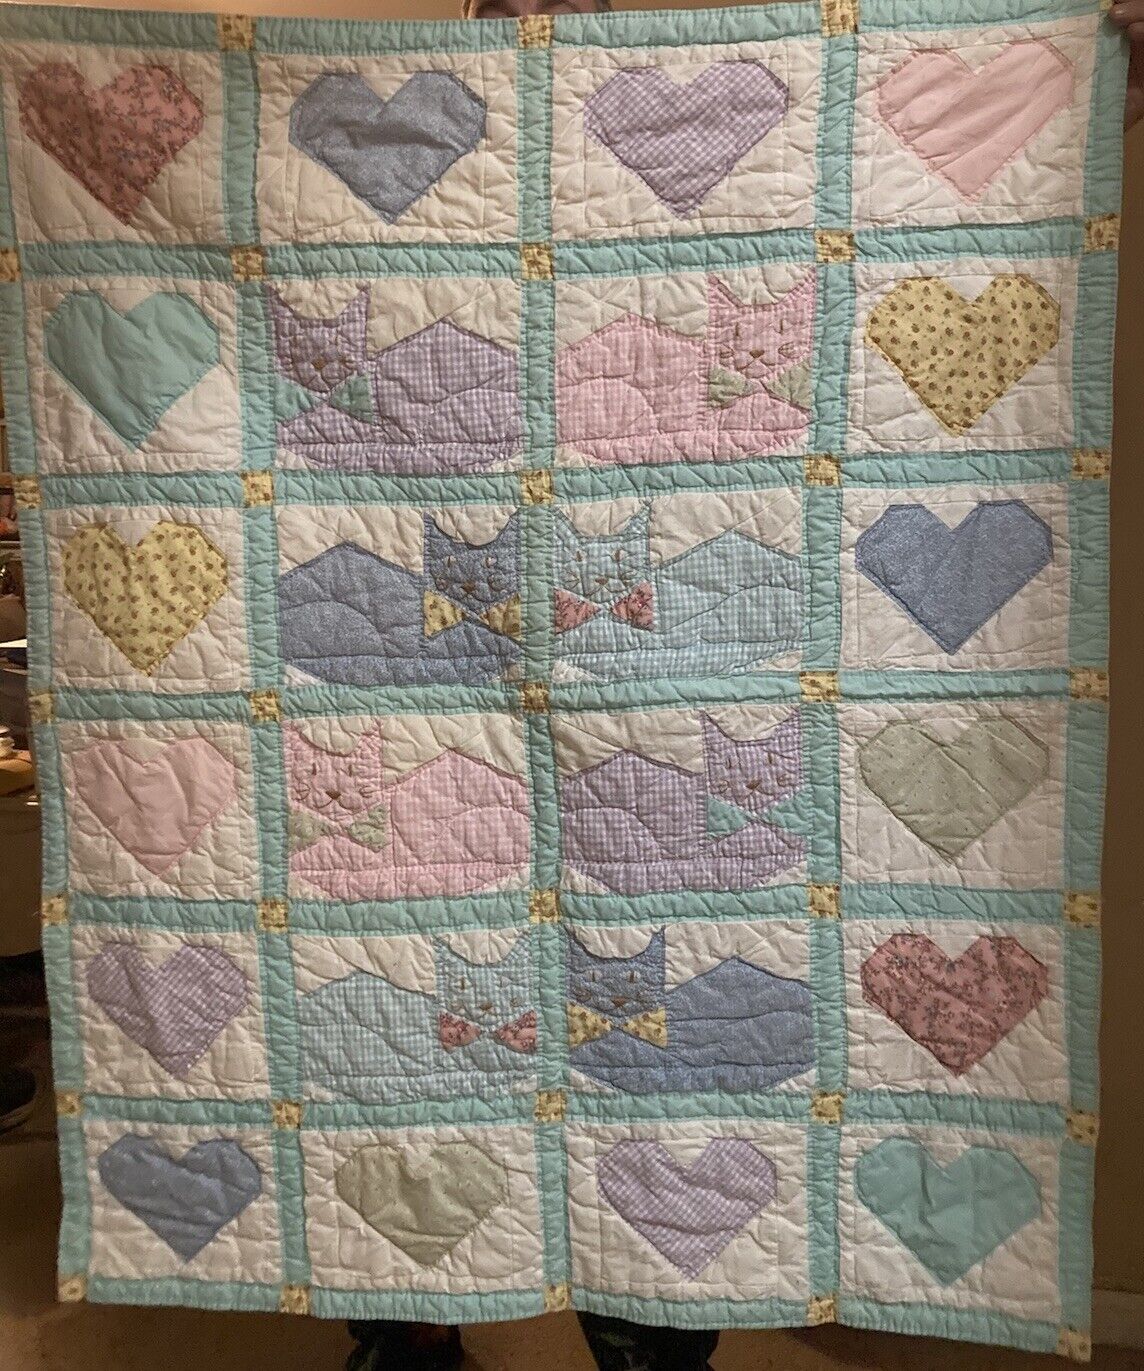 Vintage Homemade Lap Quilt Patchwork OOAK Cats and Hearts Wall Hanging 42x51